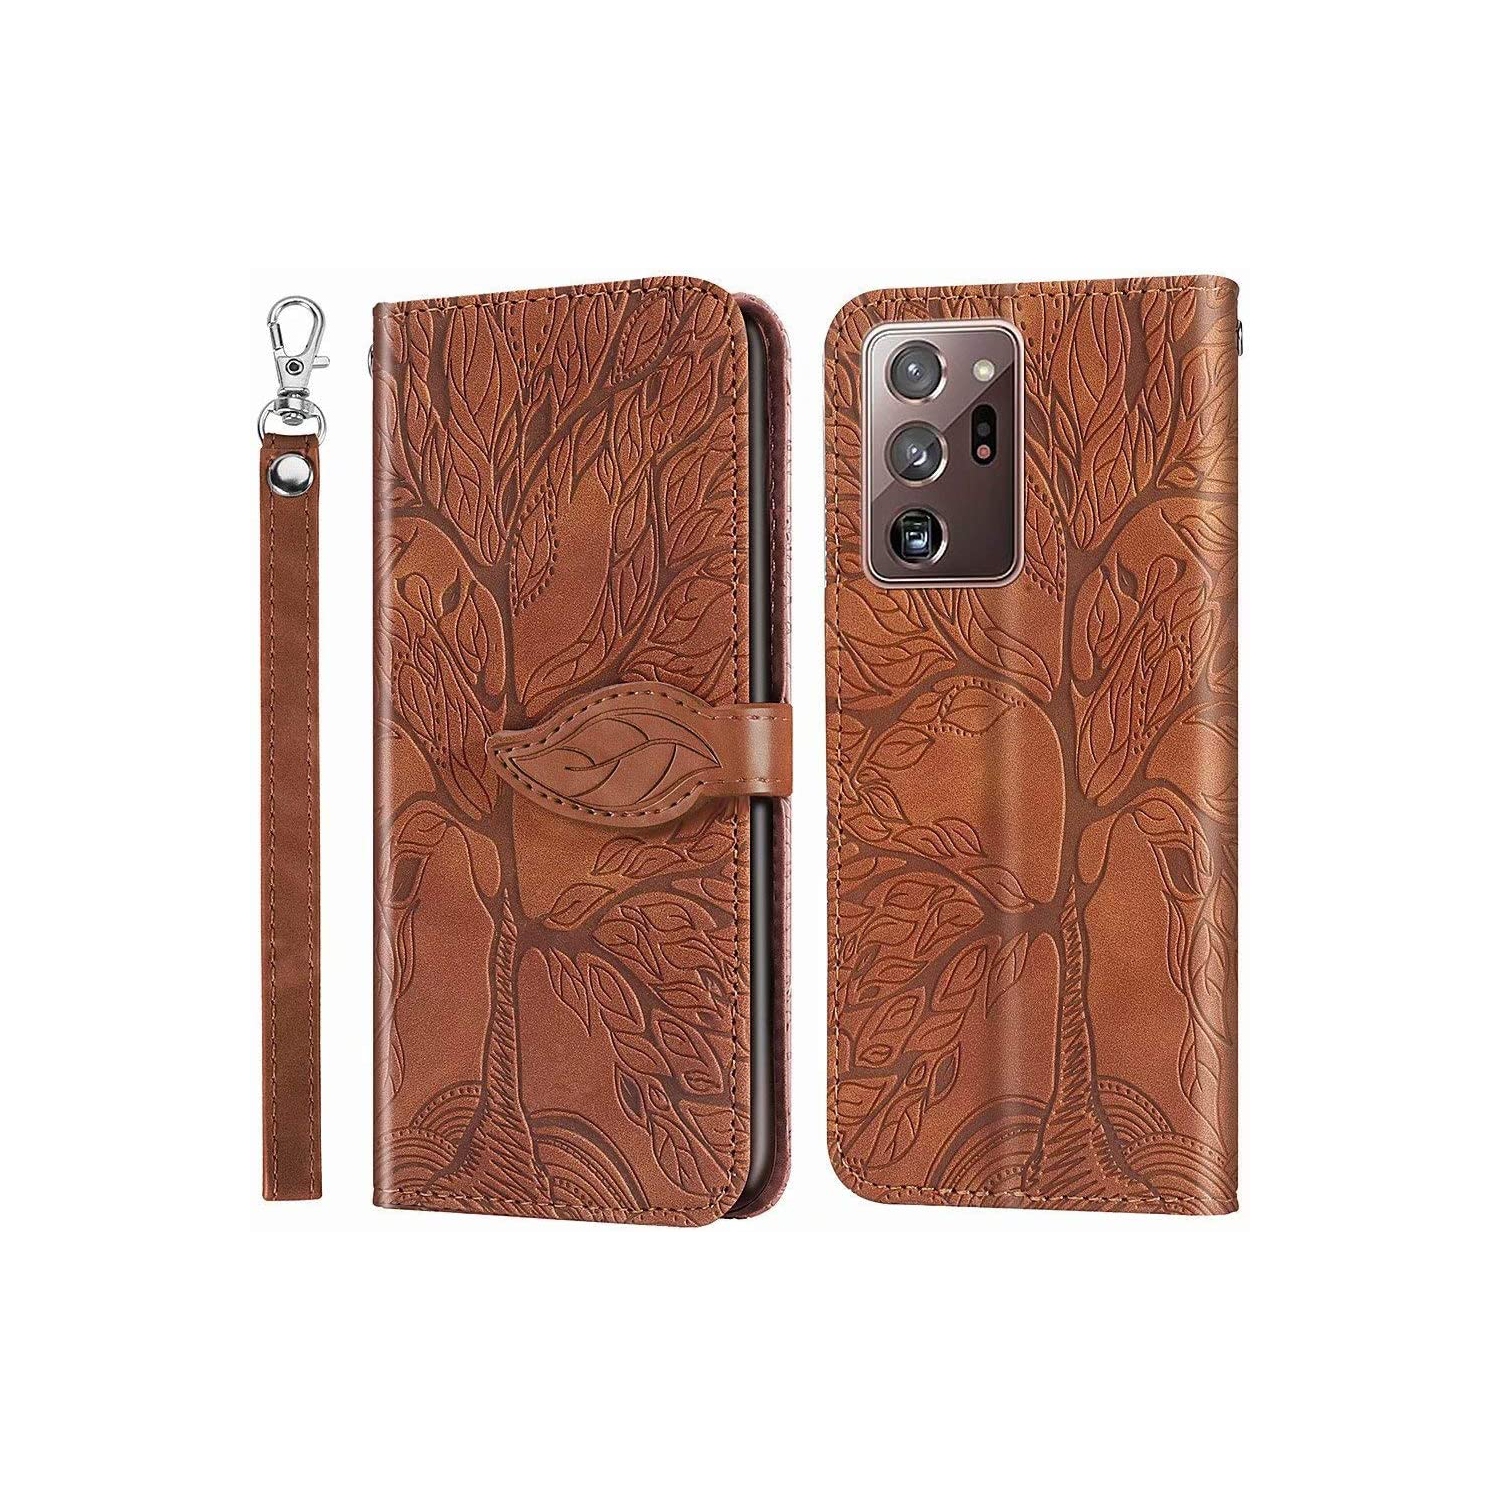 Premium PU Leather Embossed Tree Wallet Case with card slots and wrist strap for Samsung Galaxy Note 20 Ultra SM-N986